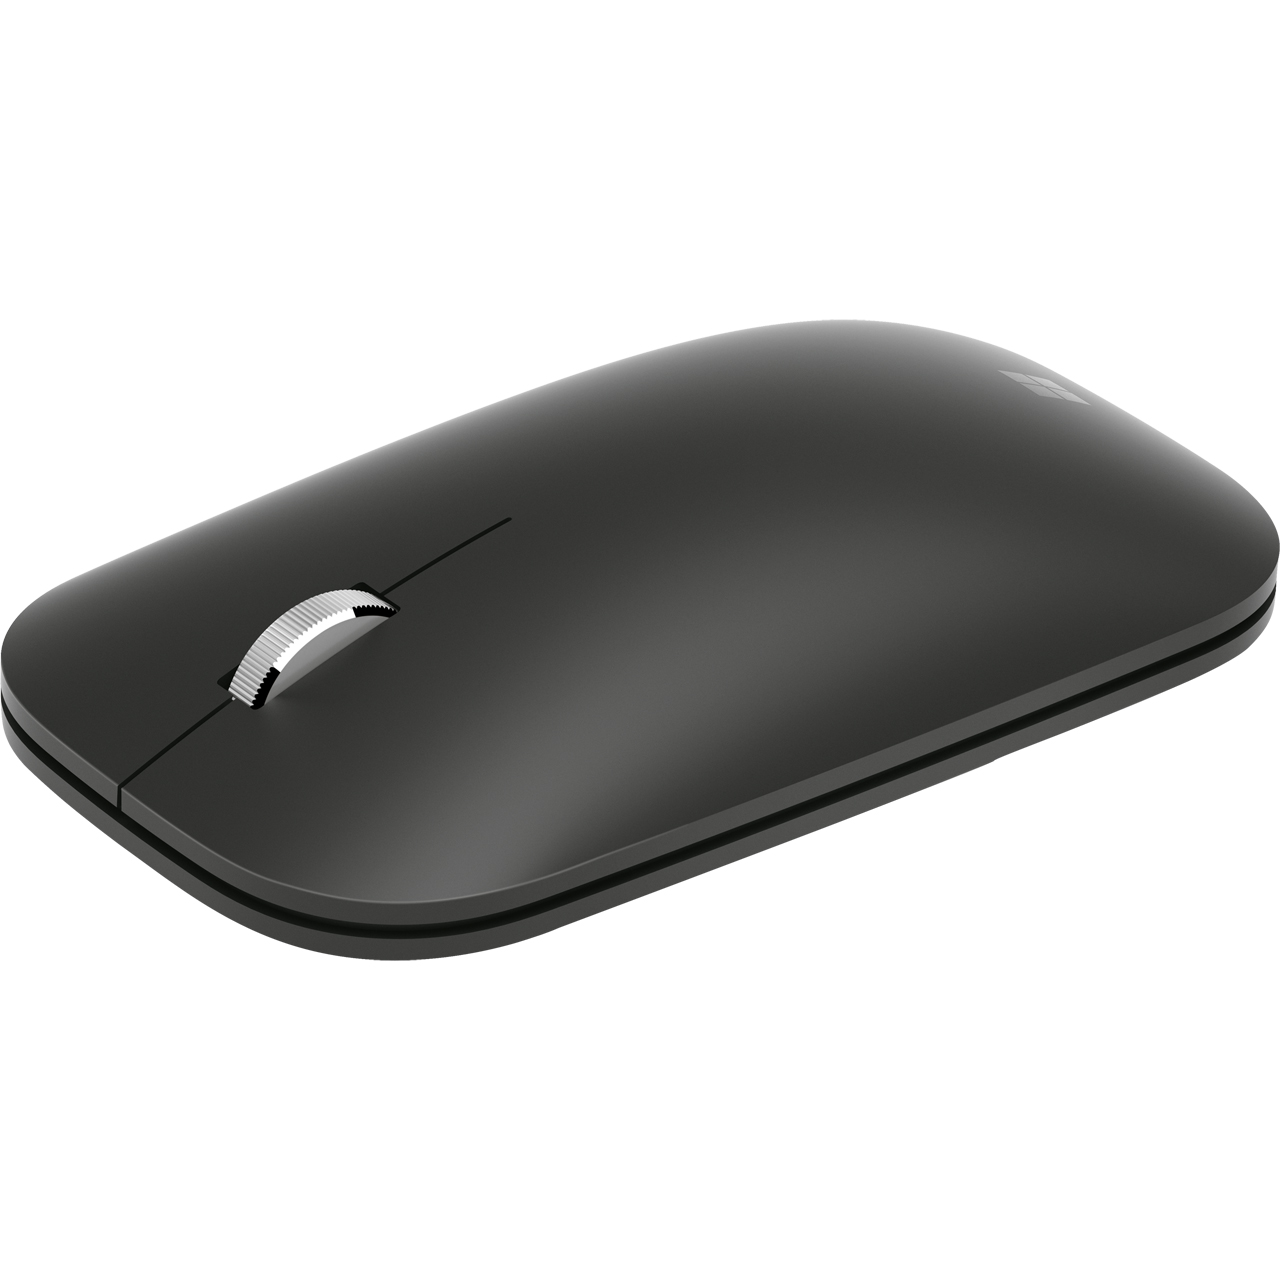 Microsoft Modern Mouse Mobile Mouse Review